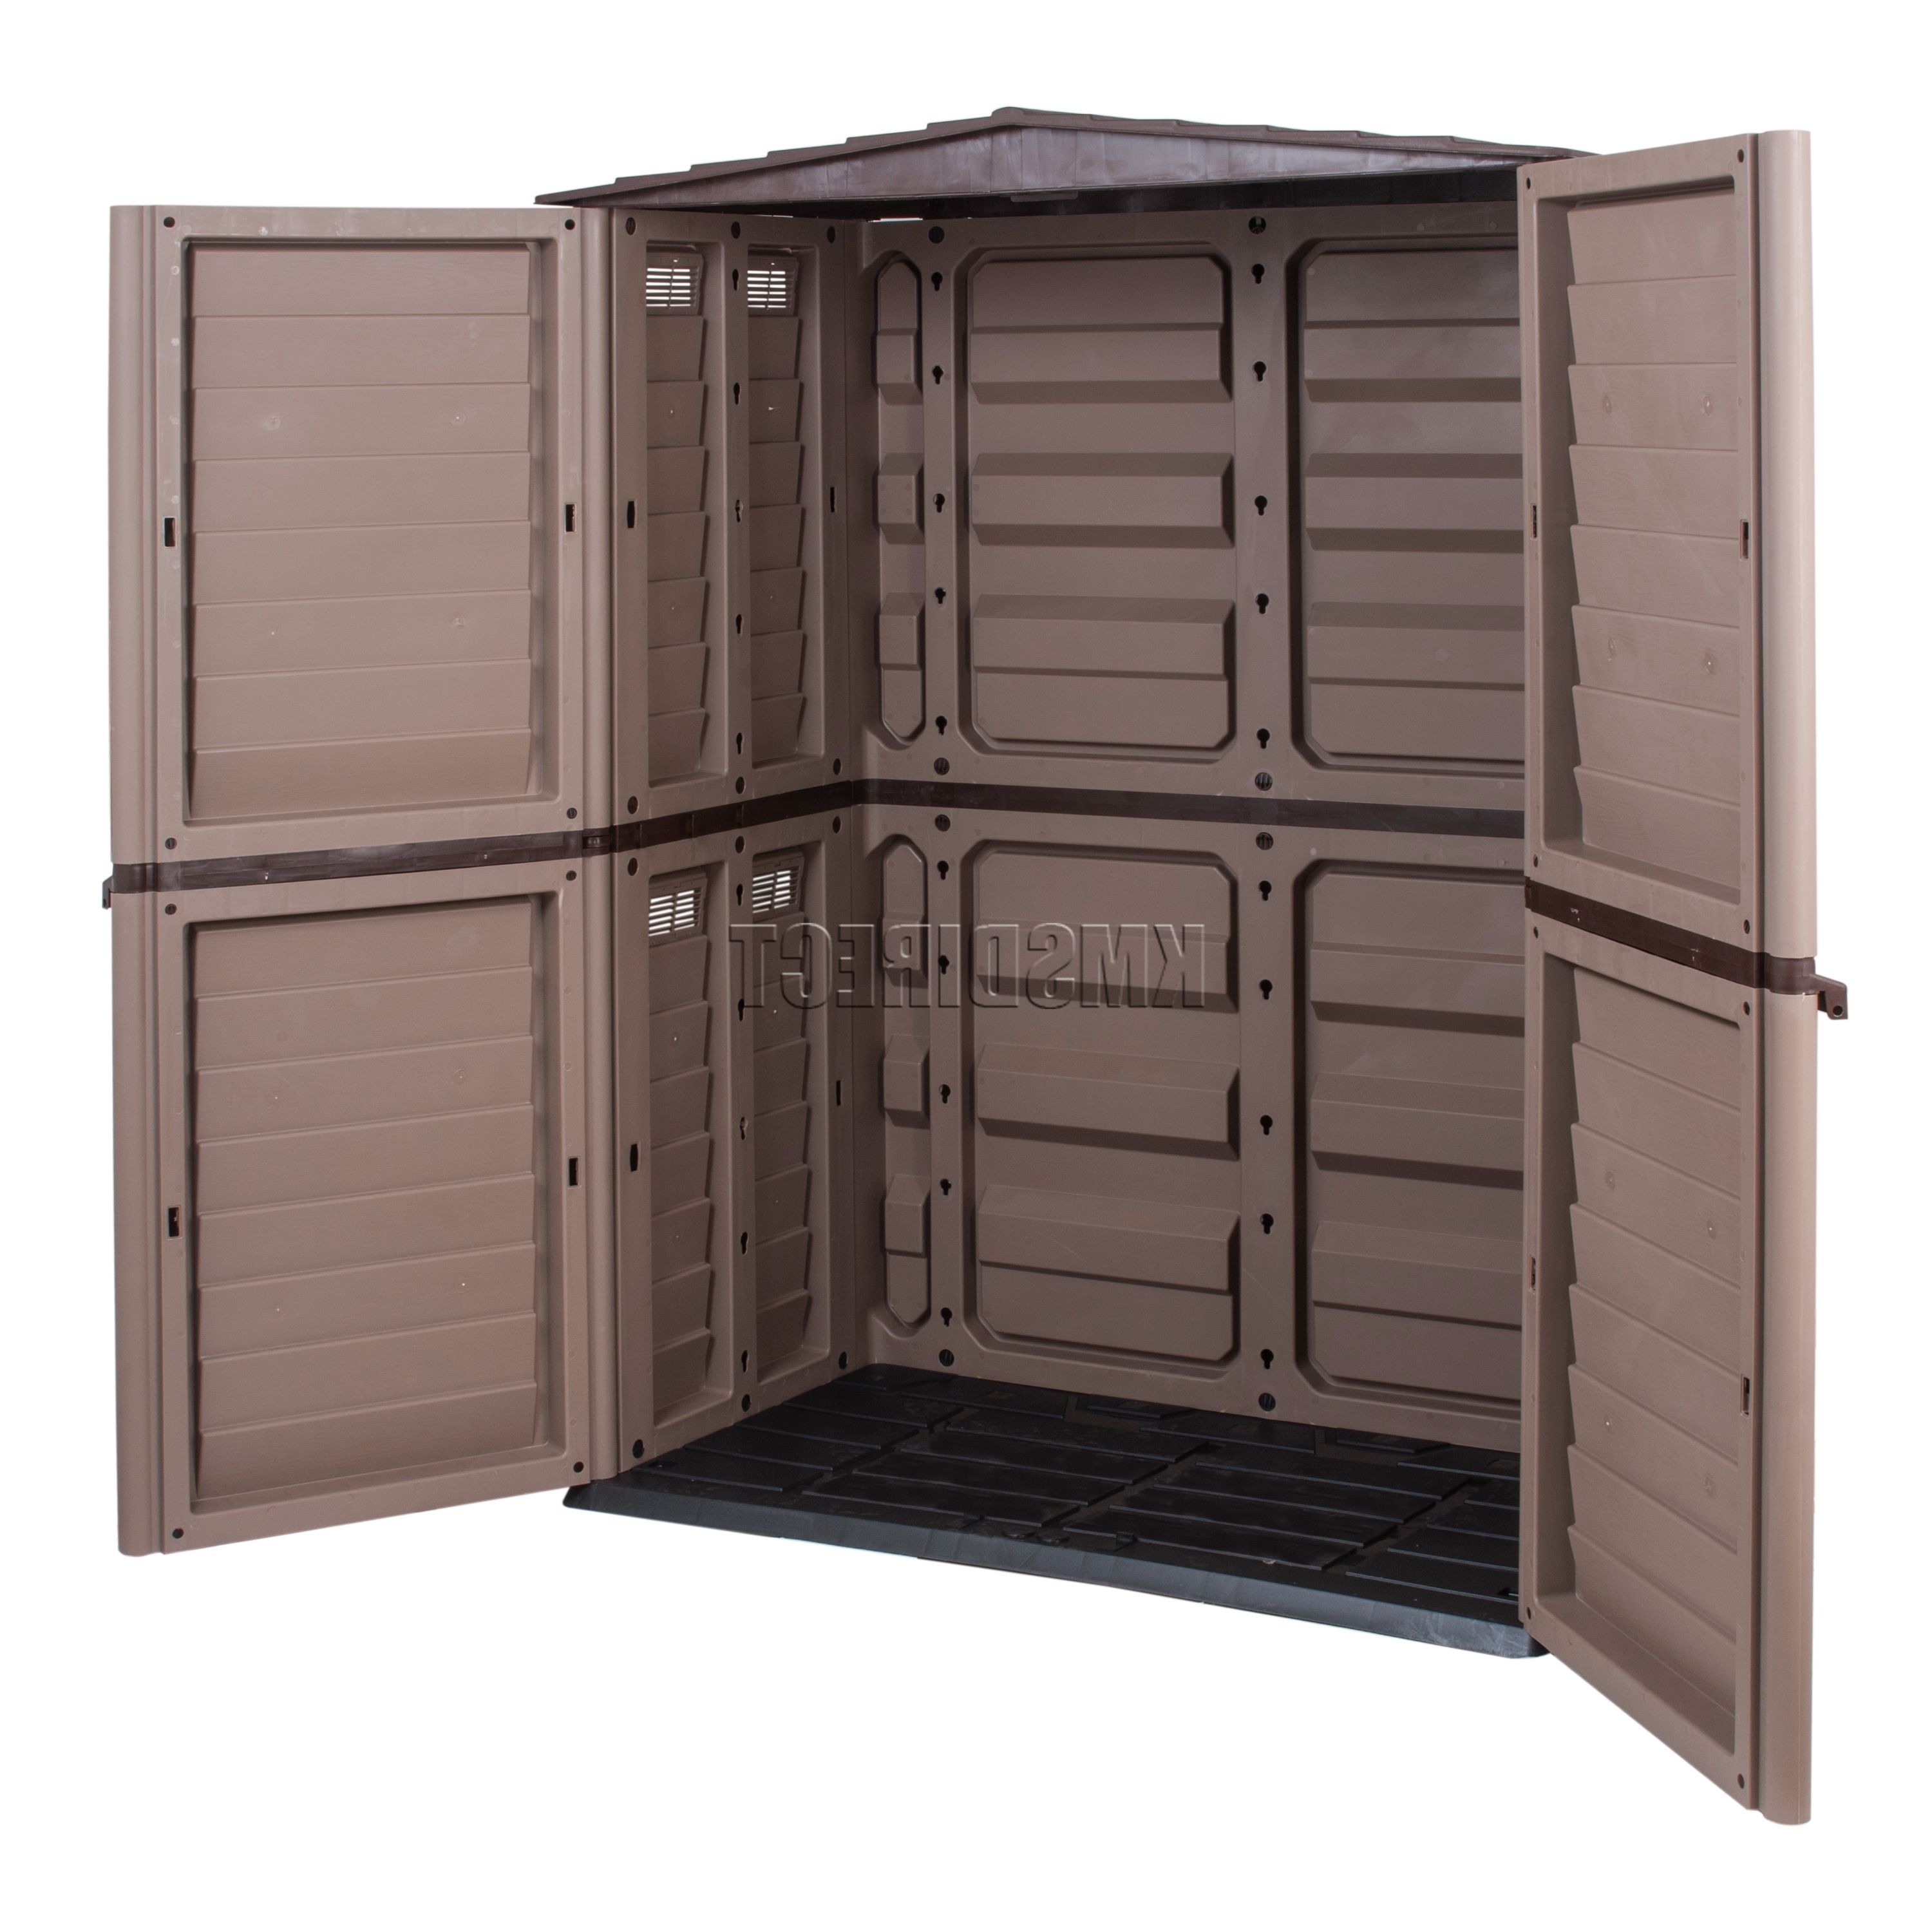 Plastic Wardrobes Box With Most Recent Starplast Outdoor Plastic Garden Tall Shed Box Storage Unit 37  (View 11 of 15)